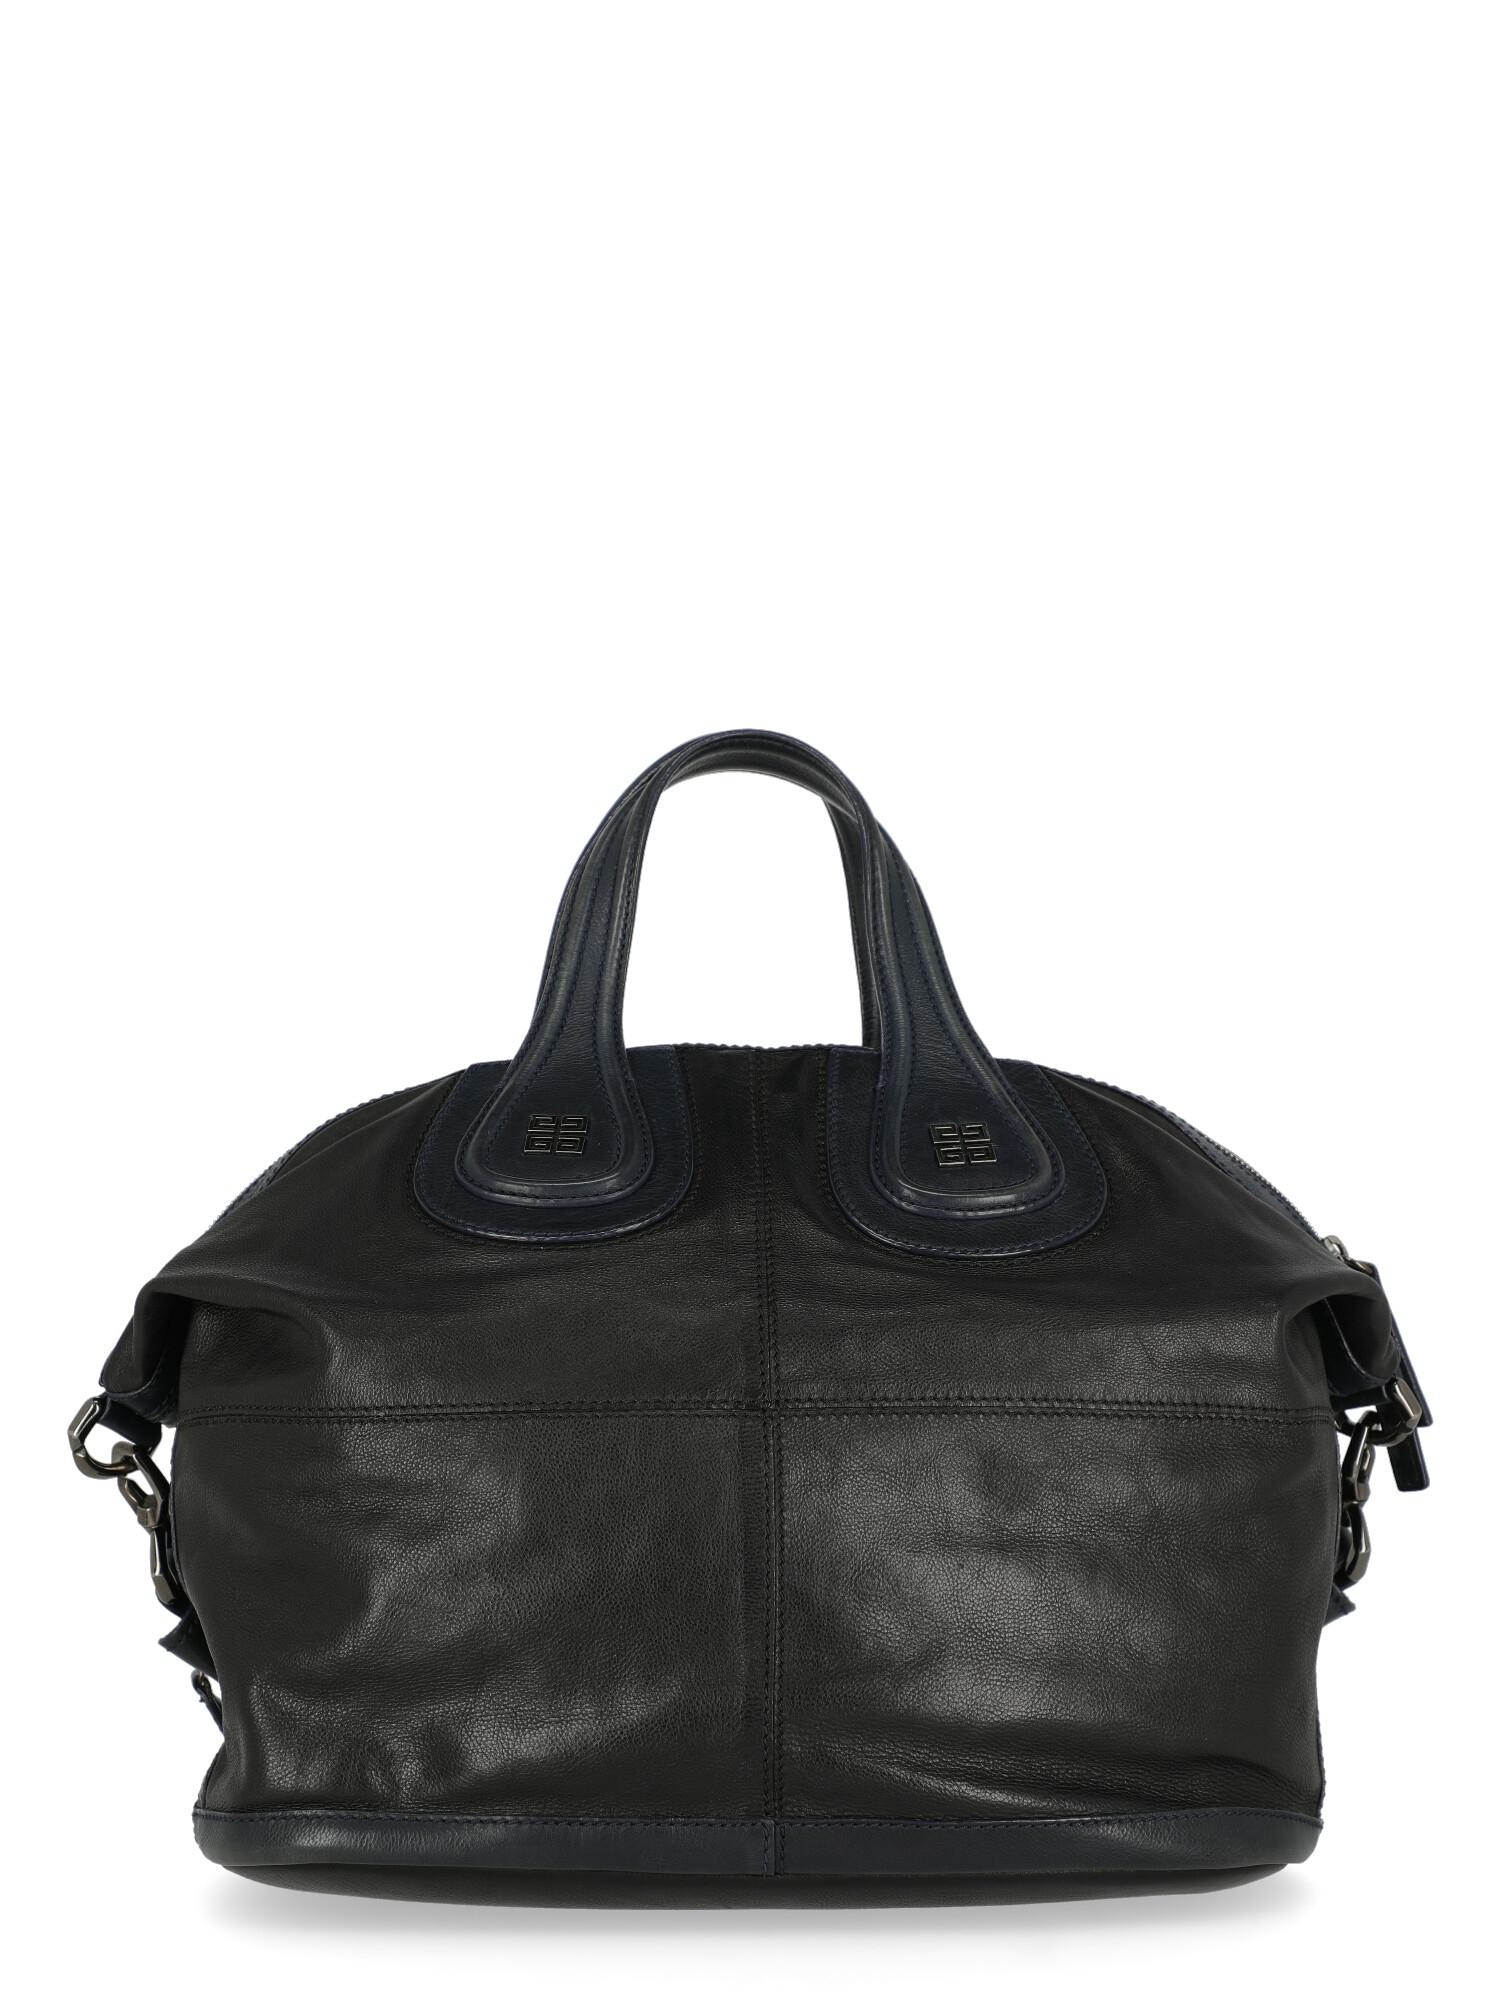 Women's Givenchy  Women Handbags Nightingale Black, Navy Leather For Sale